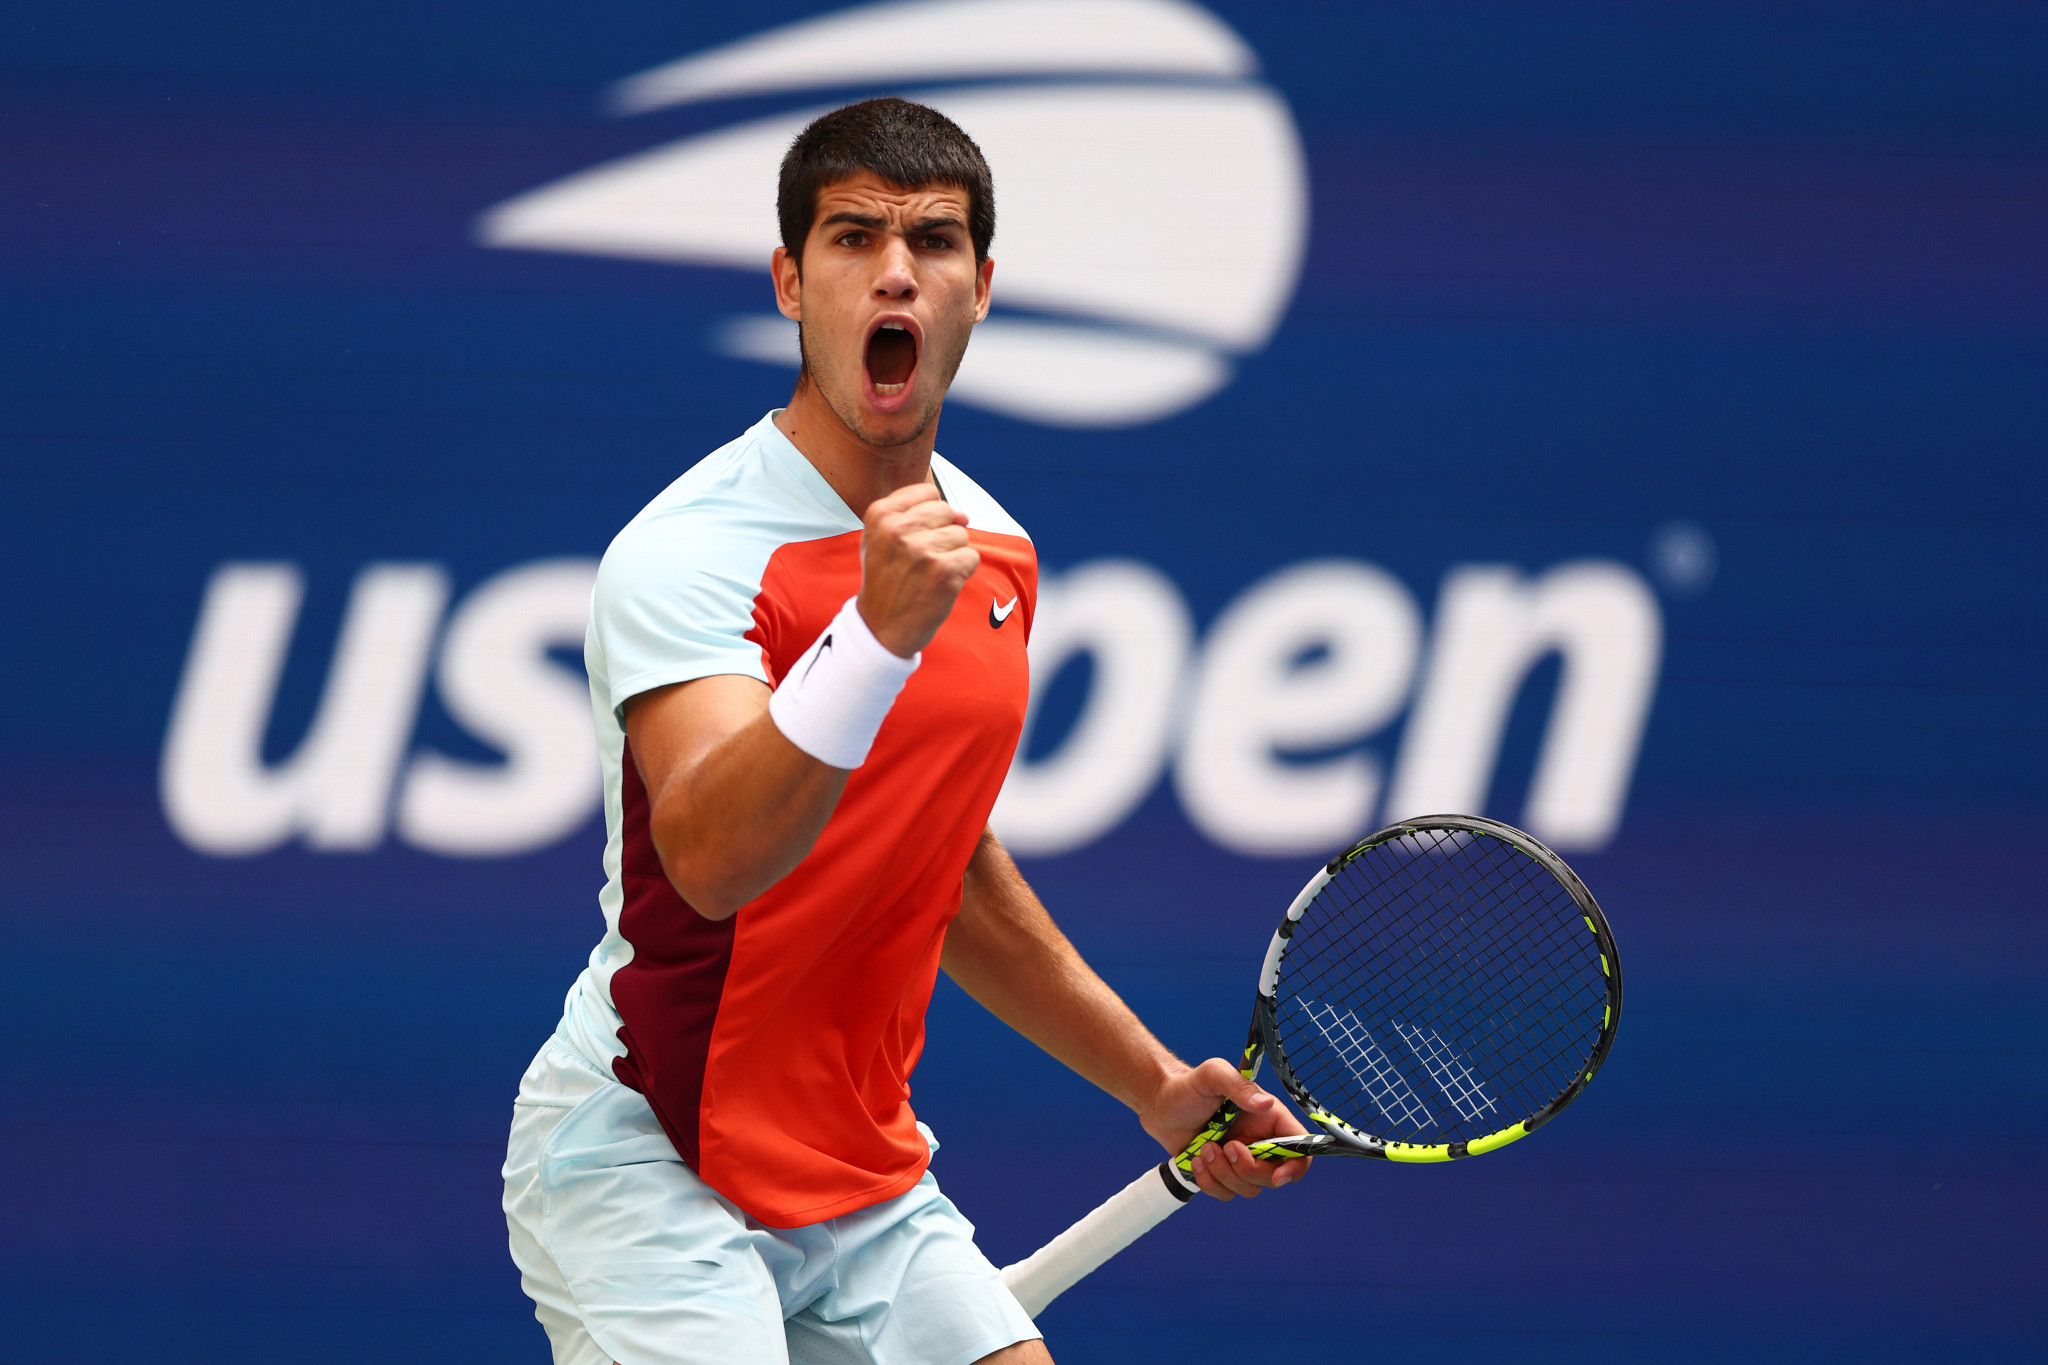 Third seed Alcaraz eases past Brooksby into fourth round of US Open